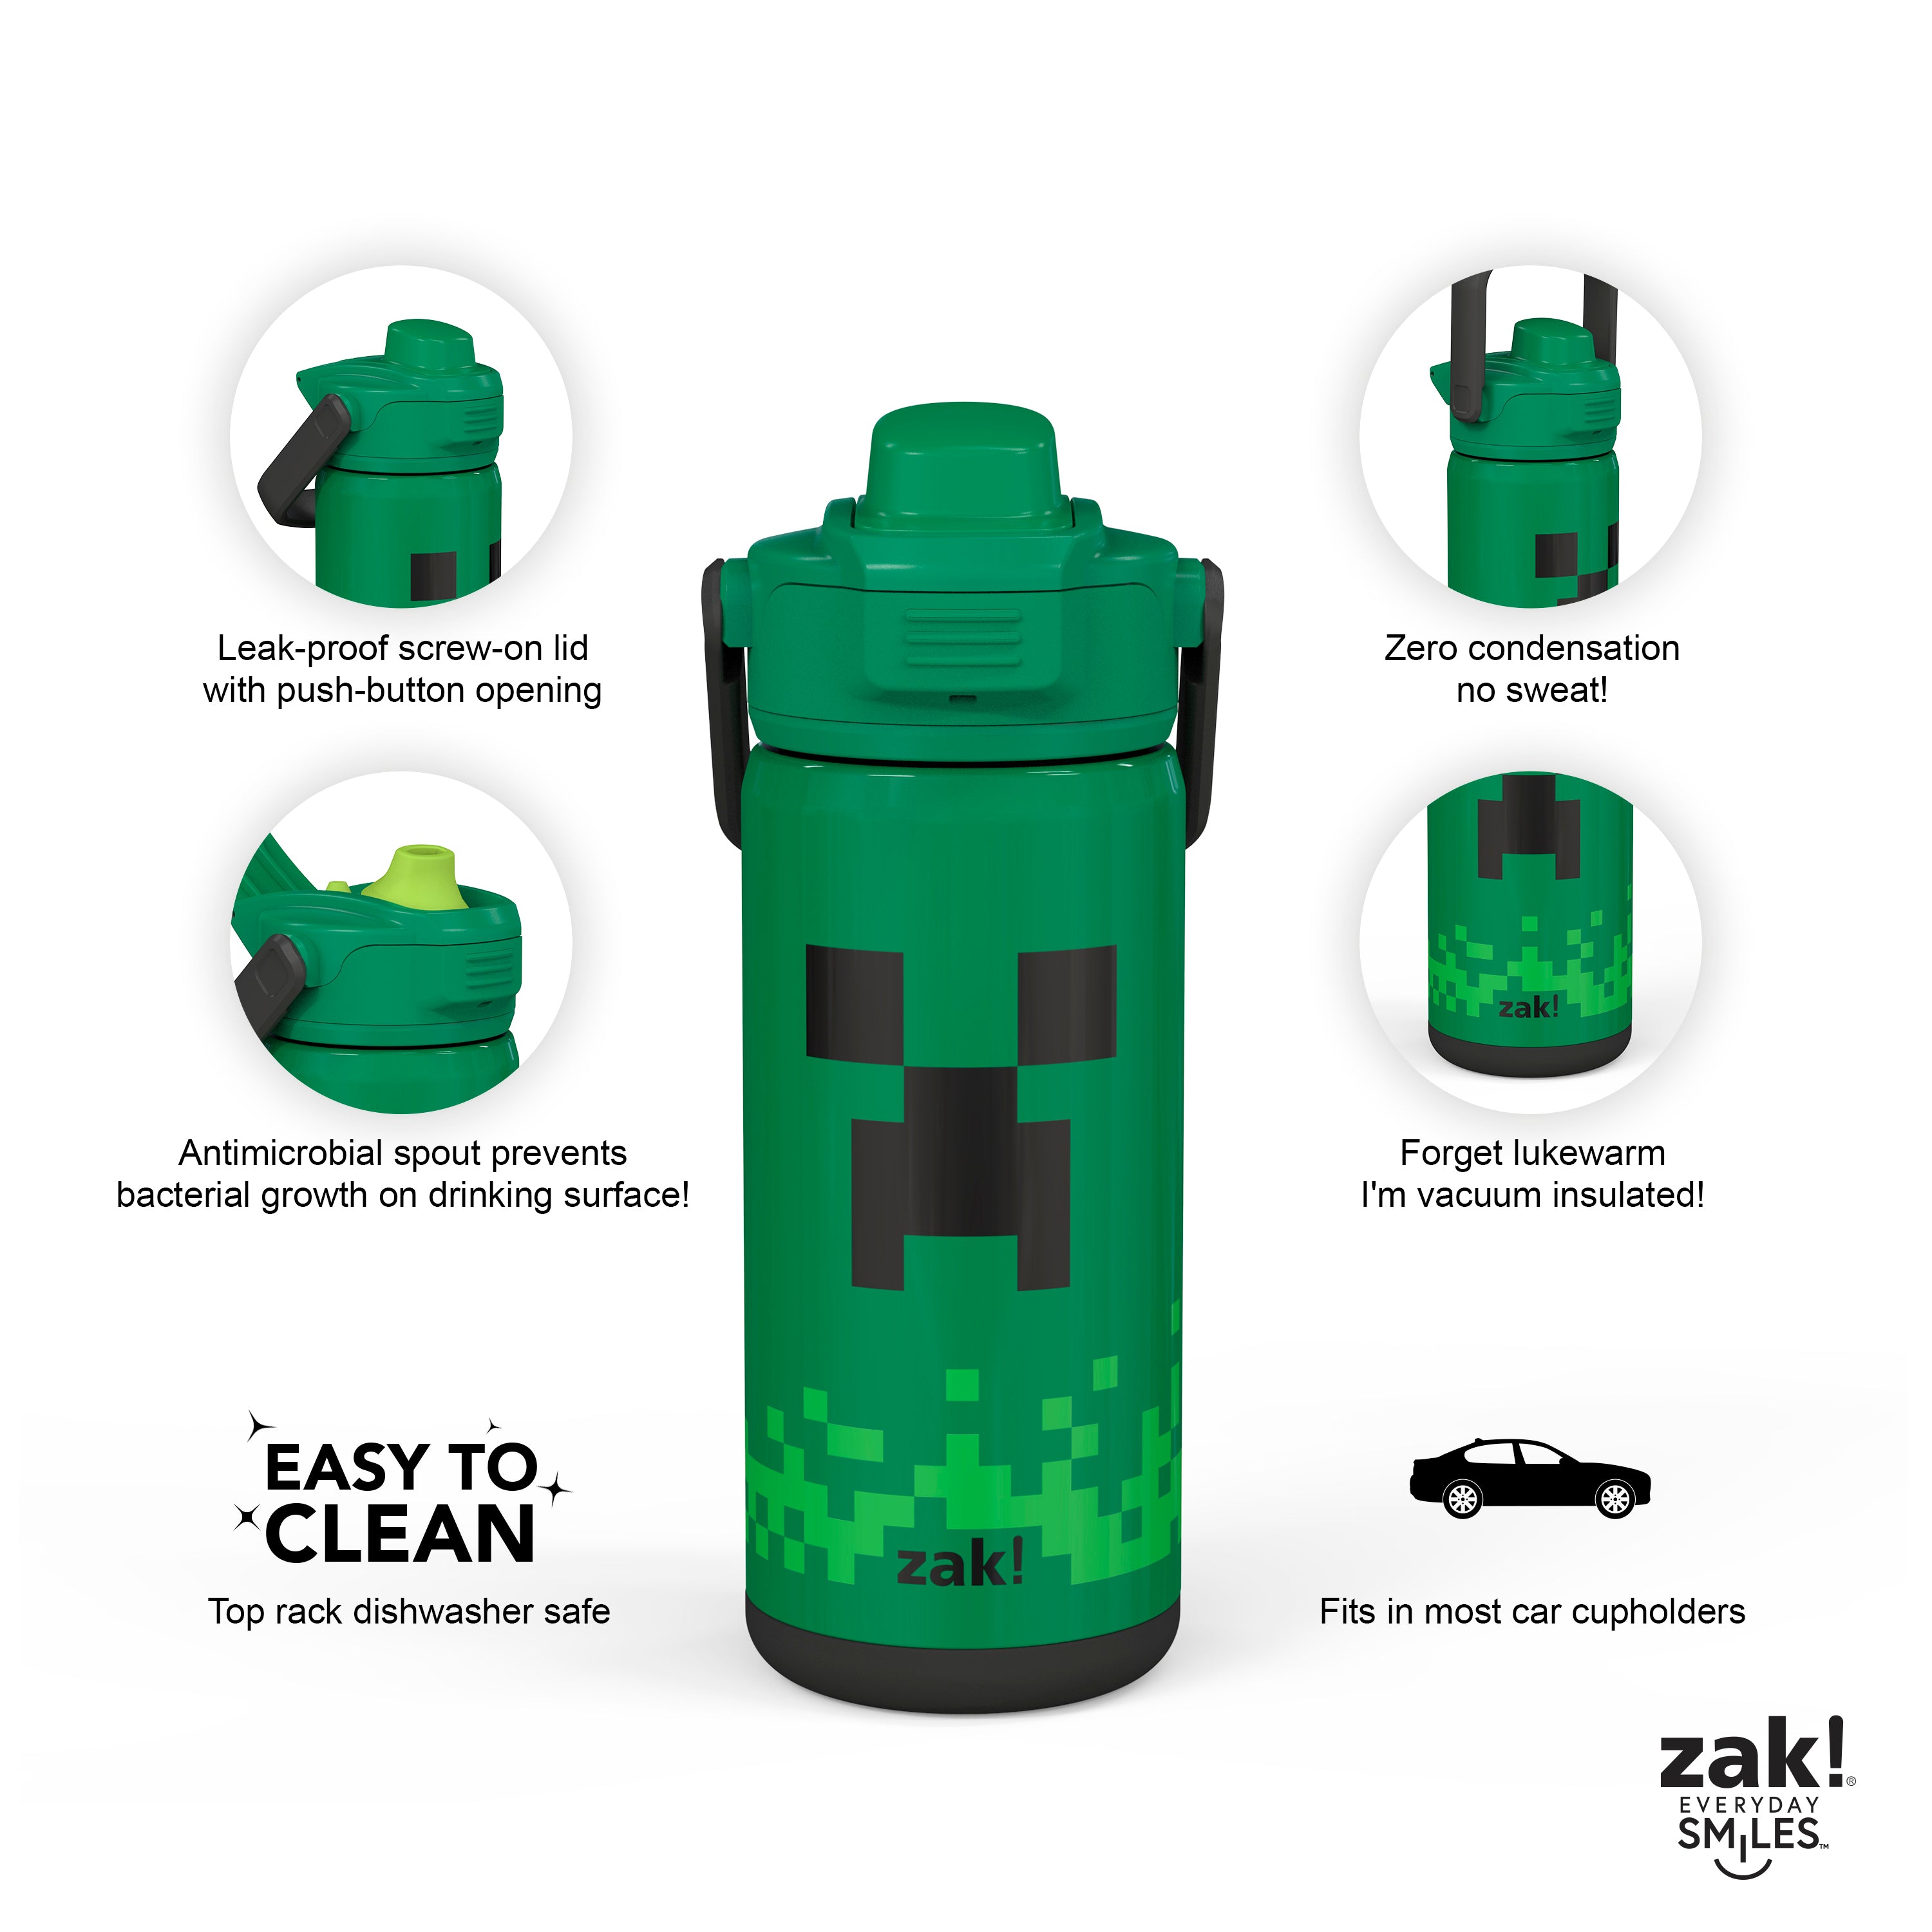 Minecraft THERMOS & Water Bottle Set Of 2, Green, Black, Creeper Themed